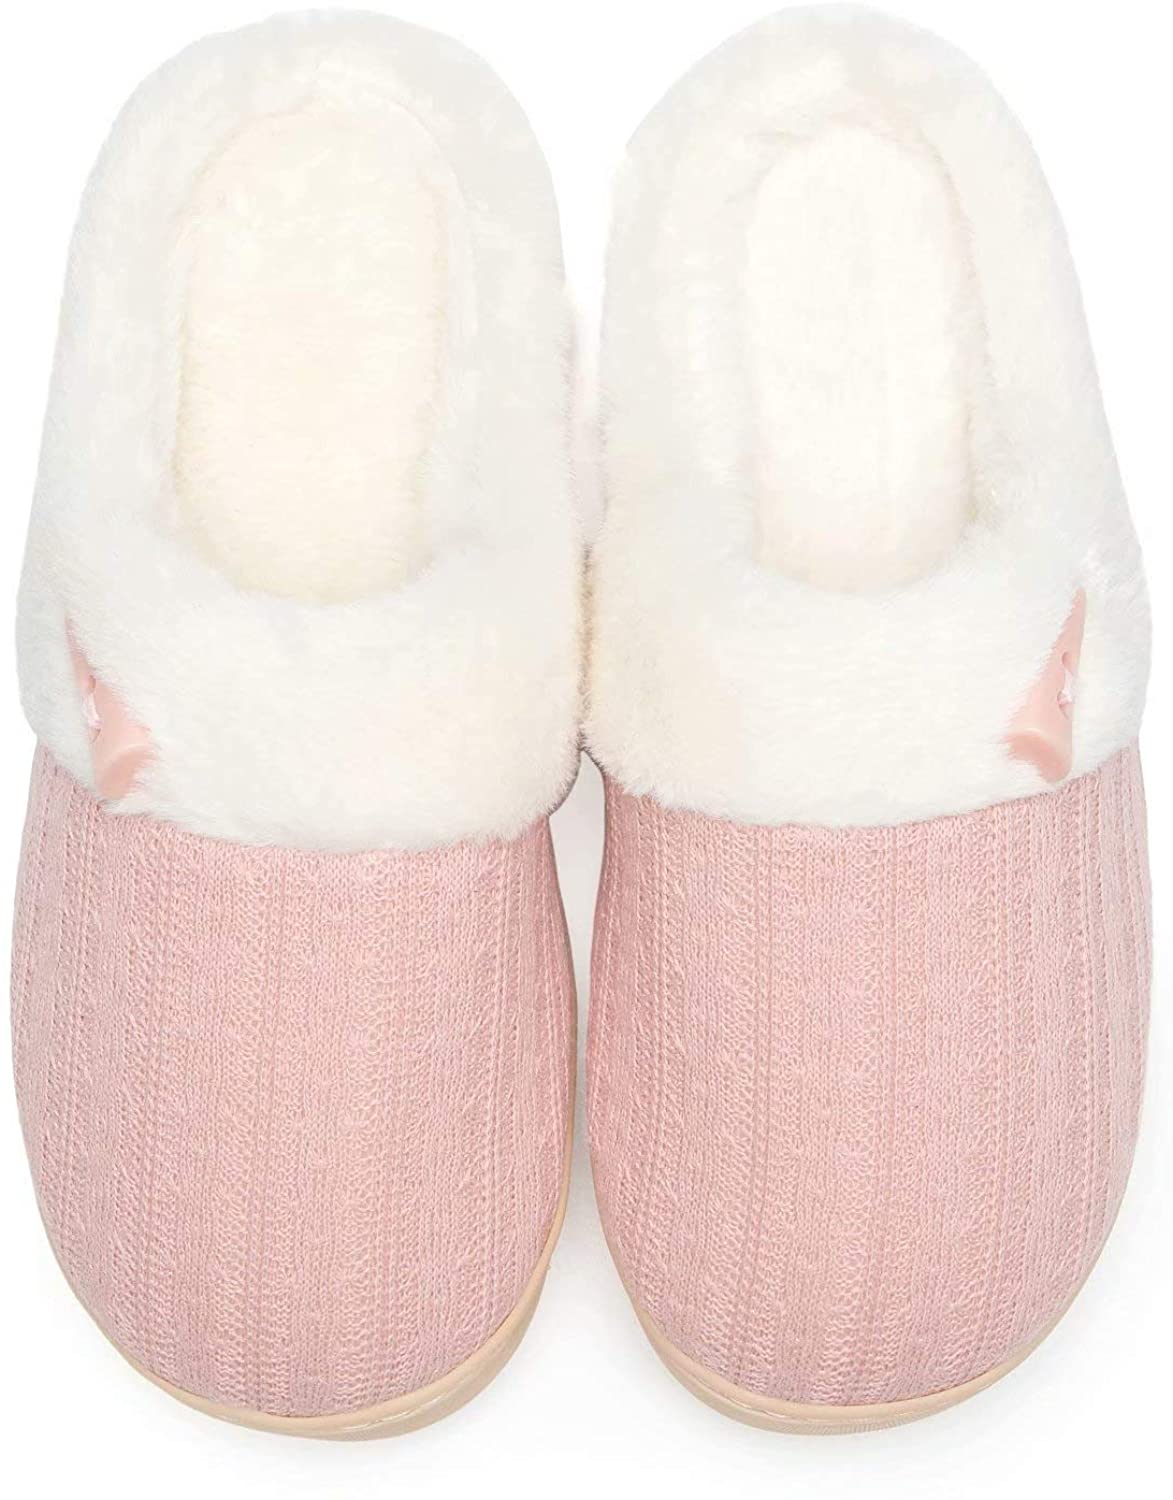  House Bedroom Slippers for Women Indoor and Outdoor with Fuzzy  Lining Memory Foam（Baby Pink,5/6）